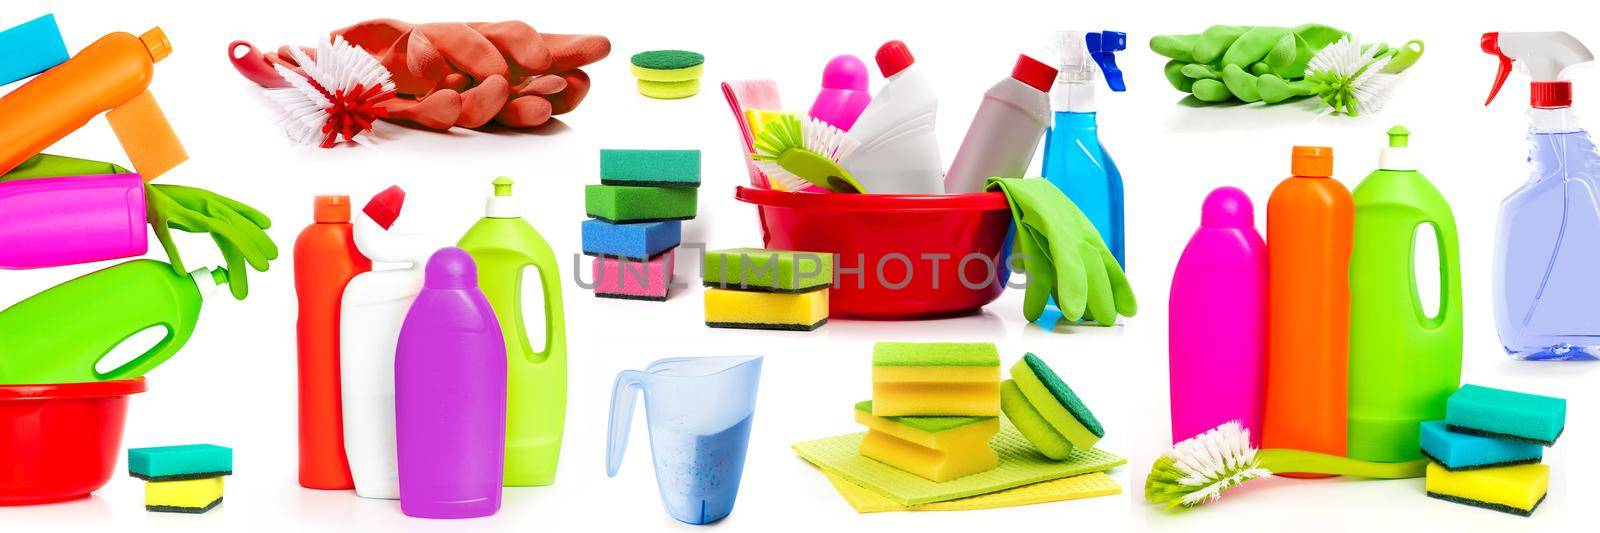 Set various detergents for home cleaning and desinfection isolated on white background. Sanitary colorful suuplies for washing and housekeeping composition